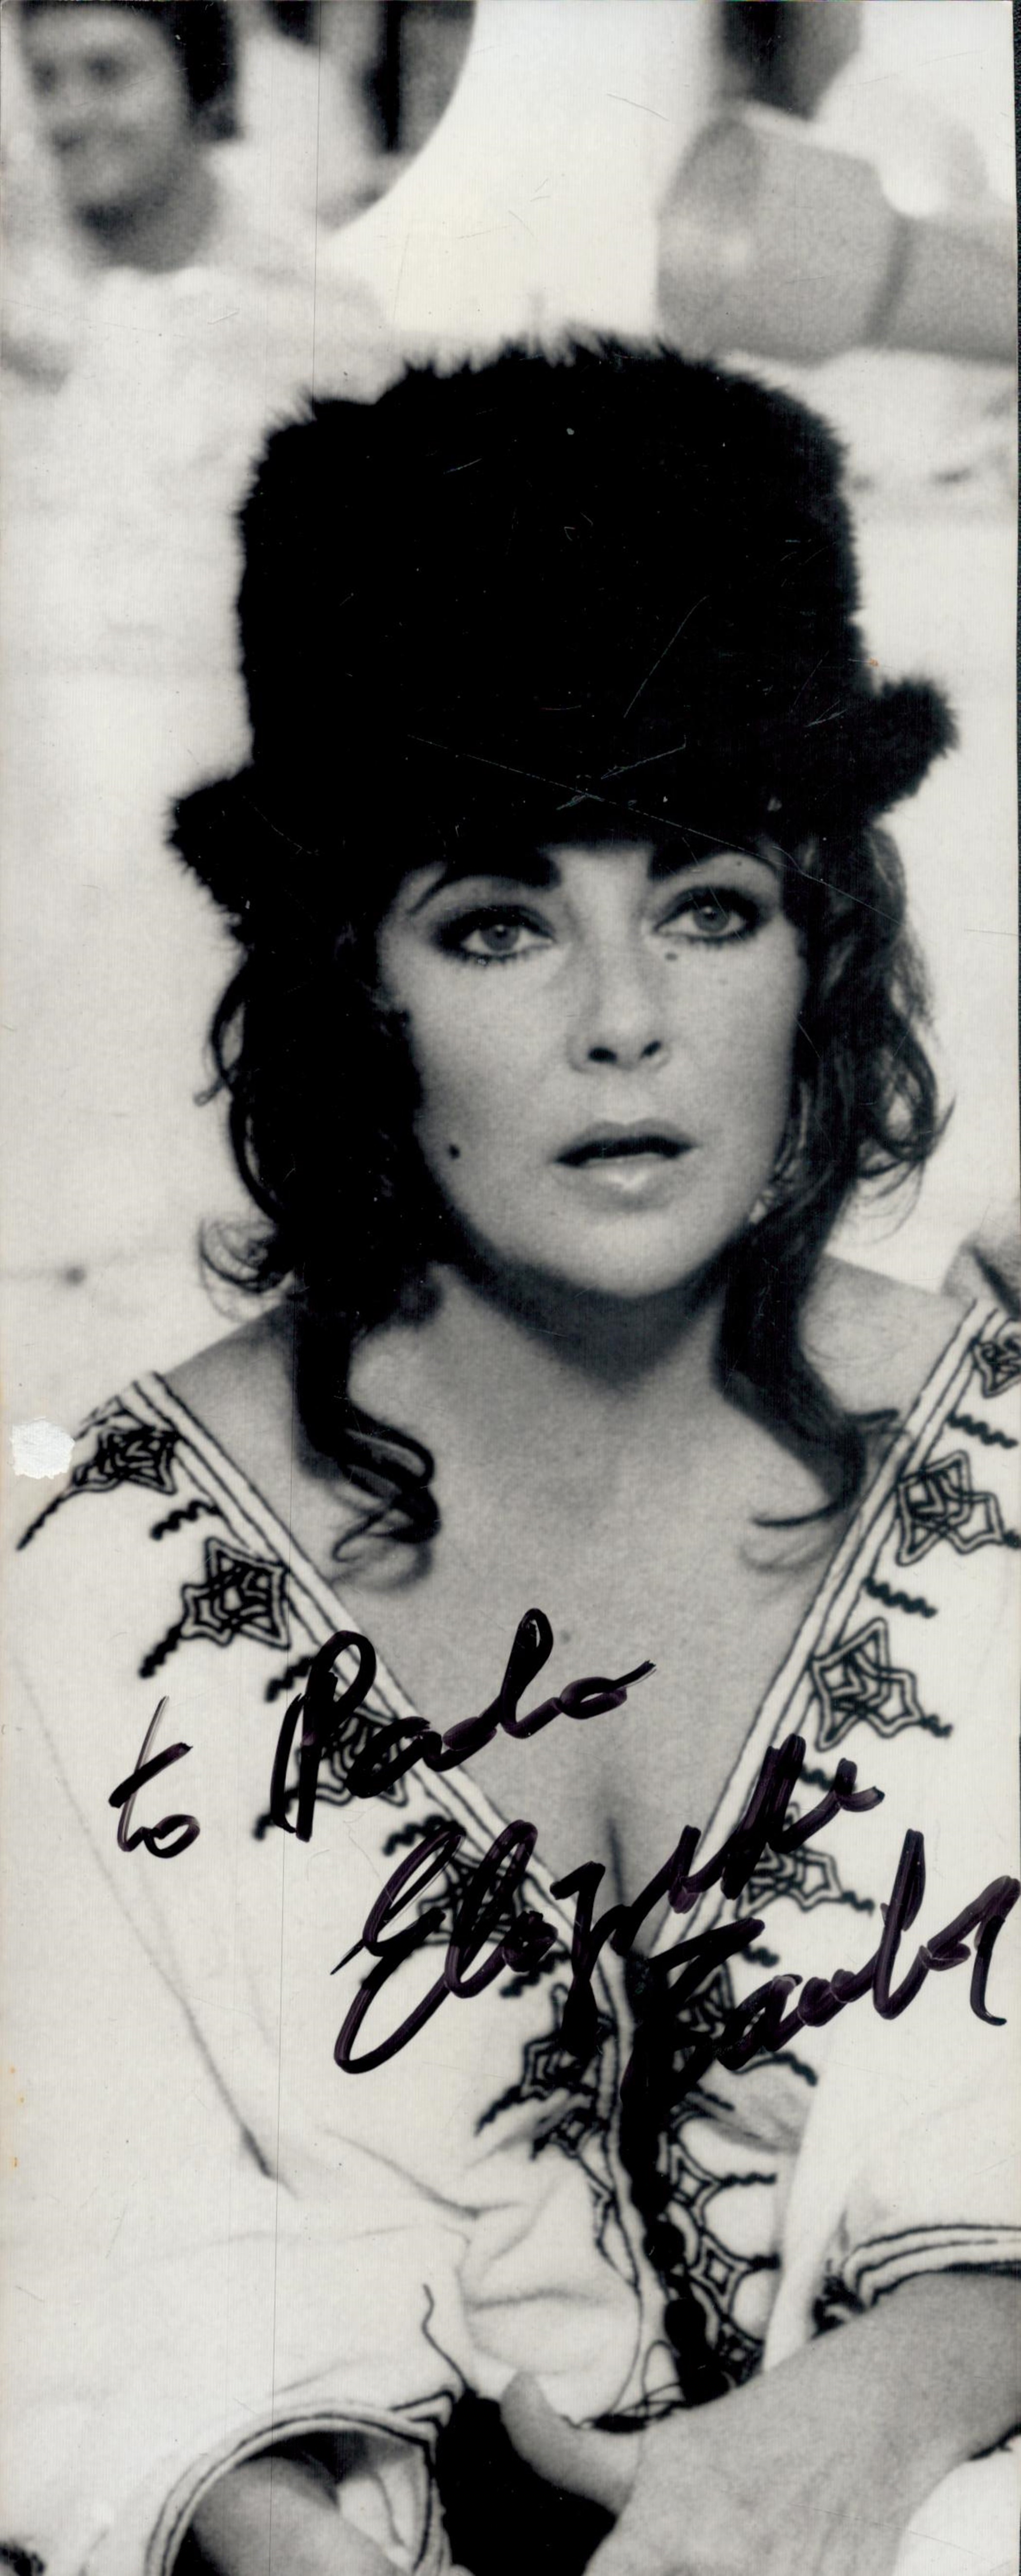 Elizabeth Taylor signed 10x4 black and white photograph dedicated and signed in black marker pen.